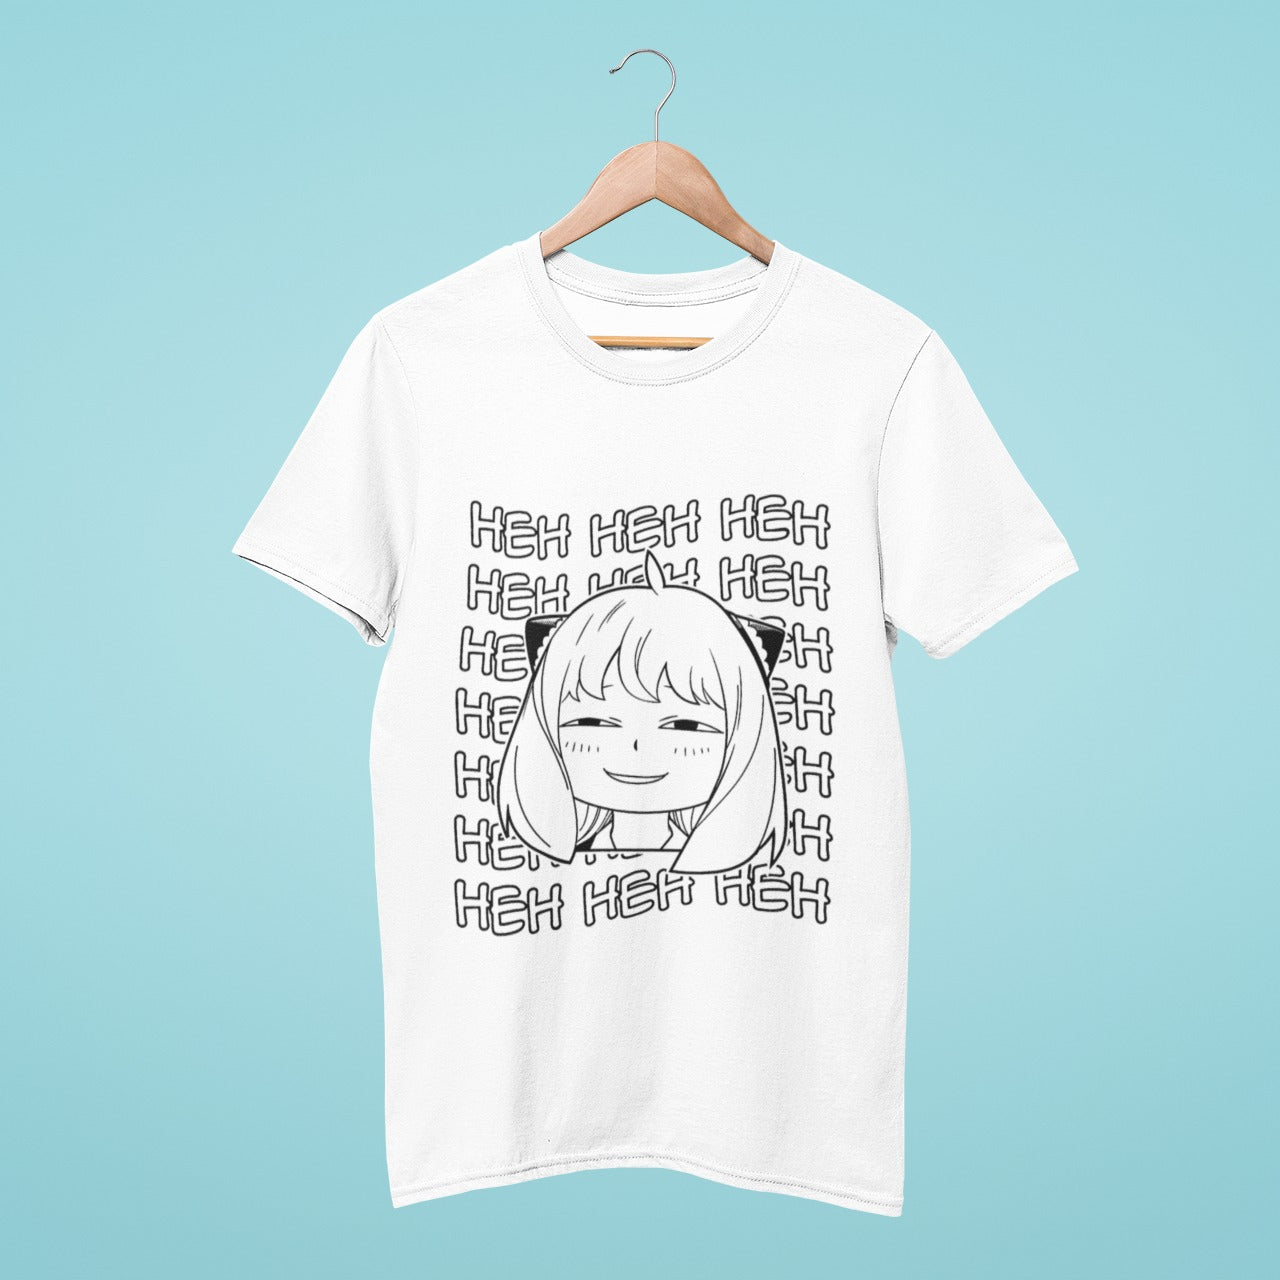 Show off your love for the popular manga series, Spy x Family, with our sleek white t-shirt featuring a striking black and white image of Anya smirking, with "heh heh heh" in the background. Made with high-quality materials, this unique t-shirt is perfect for casual outings and manga conventions. Get yours today and add some flair to your wardrobe!